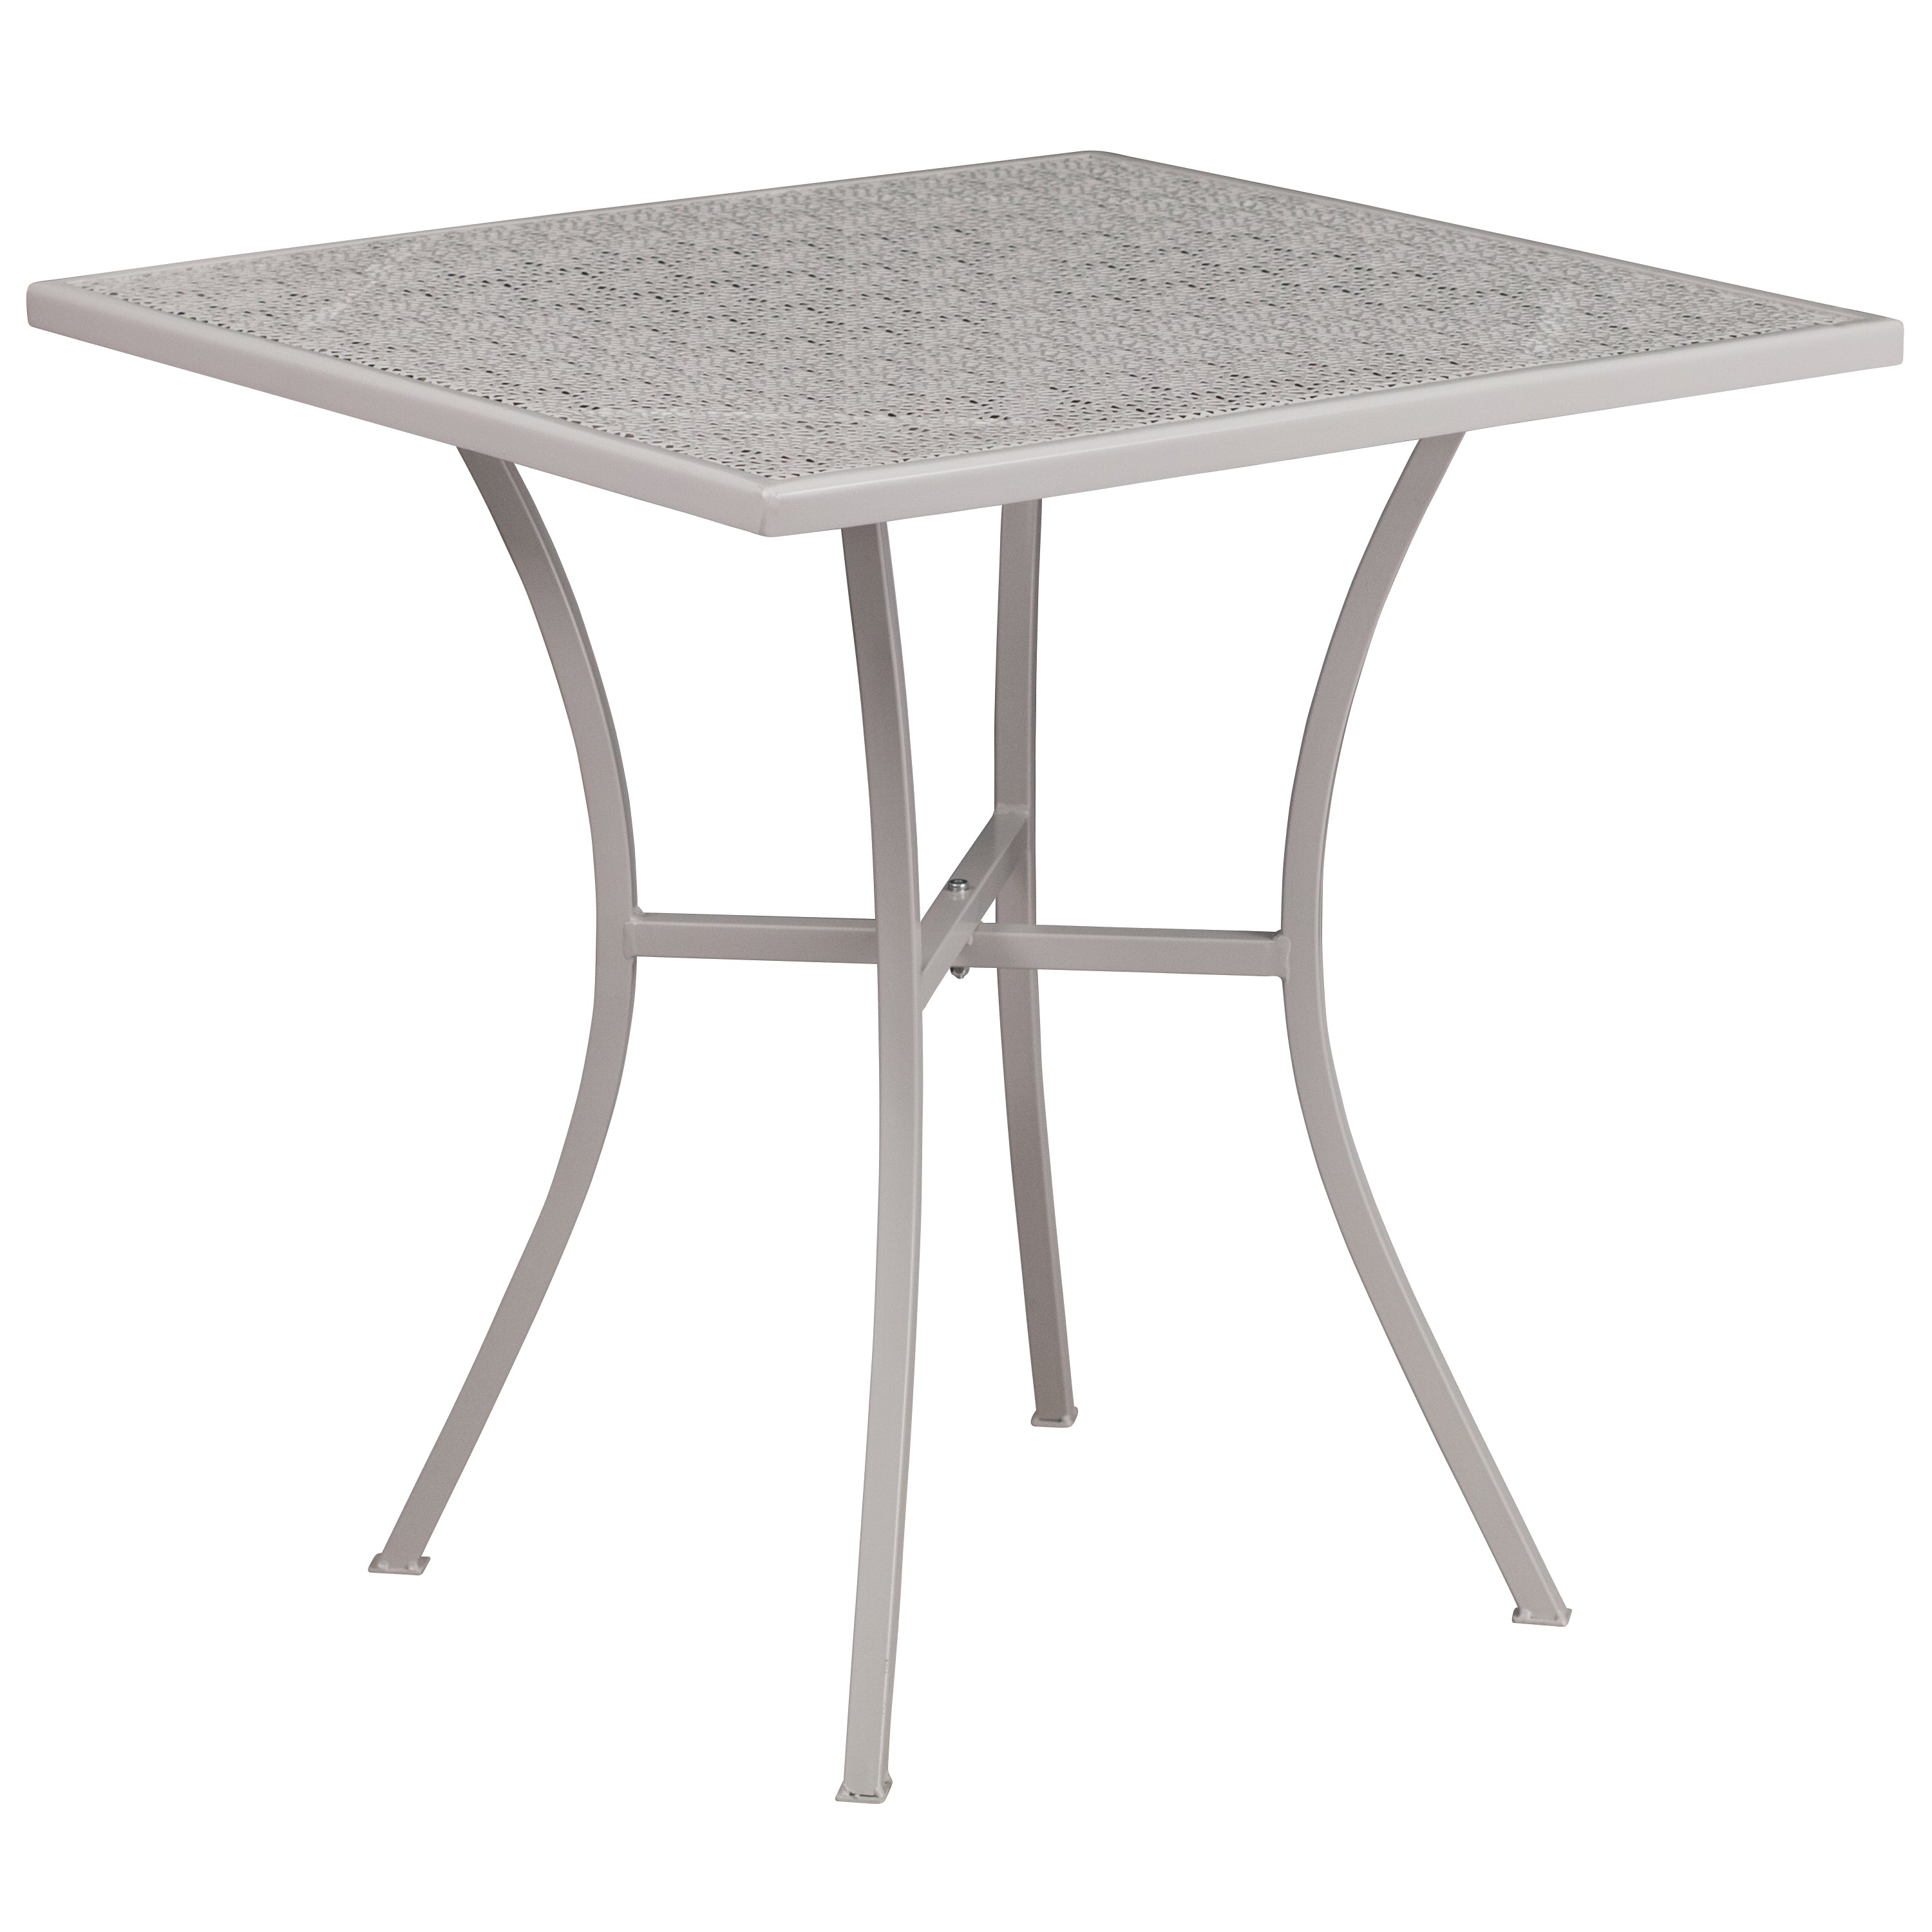 Oia Commercial Grade 28" Square Indoor-Outdoor Steel Patio Table Set with 2 Round Back Chairs-Indoor/Outdoor Dining Sets-Flash Furniture-Wall2Wall Furnishings